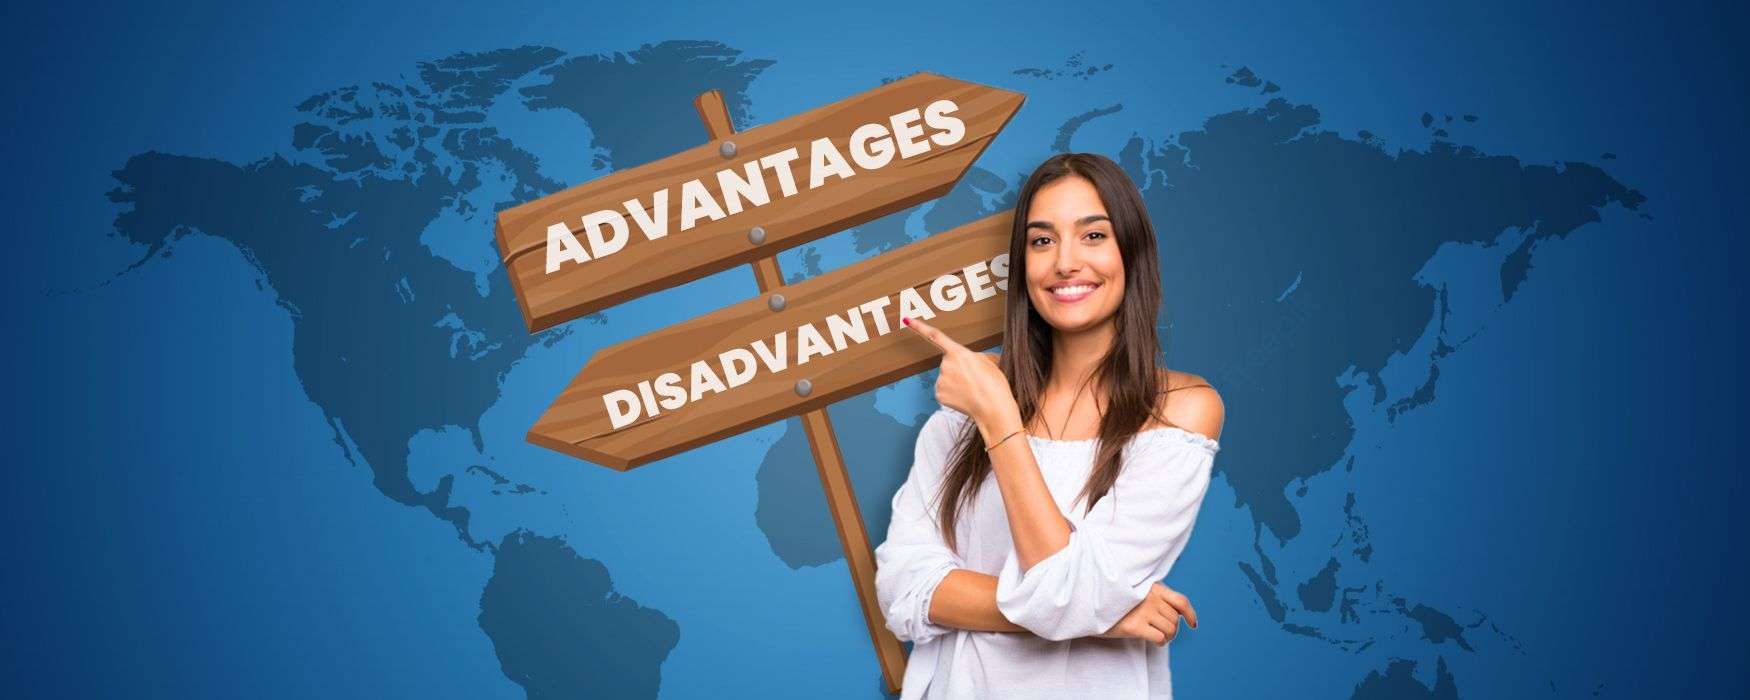 Advantages and Disadvantages of Studying Abroad.jpg